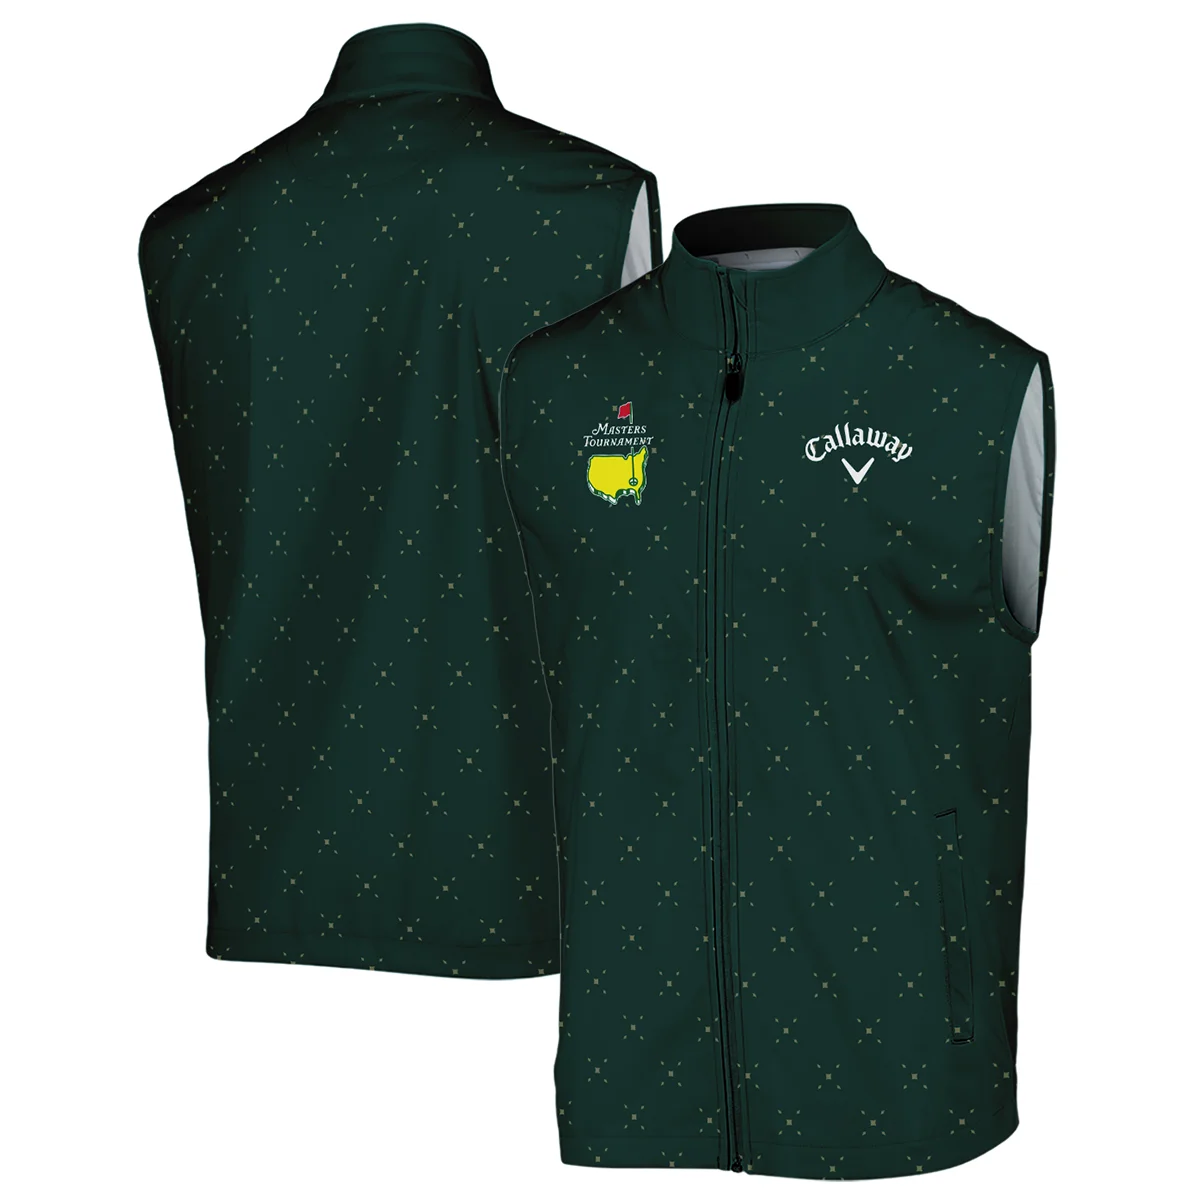 Diamond Shapes With Geometric Pattern Masters Tournament Callaway Bomber Jacket Style Classic Bomber Jacket